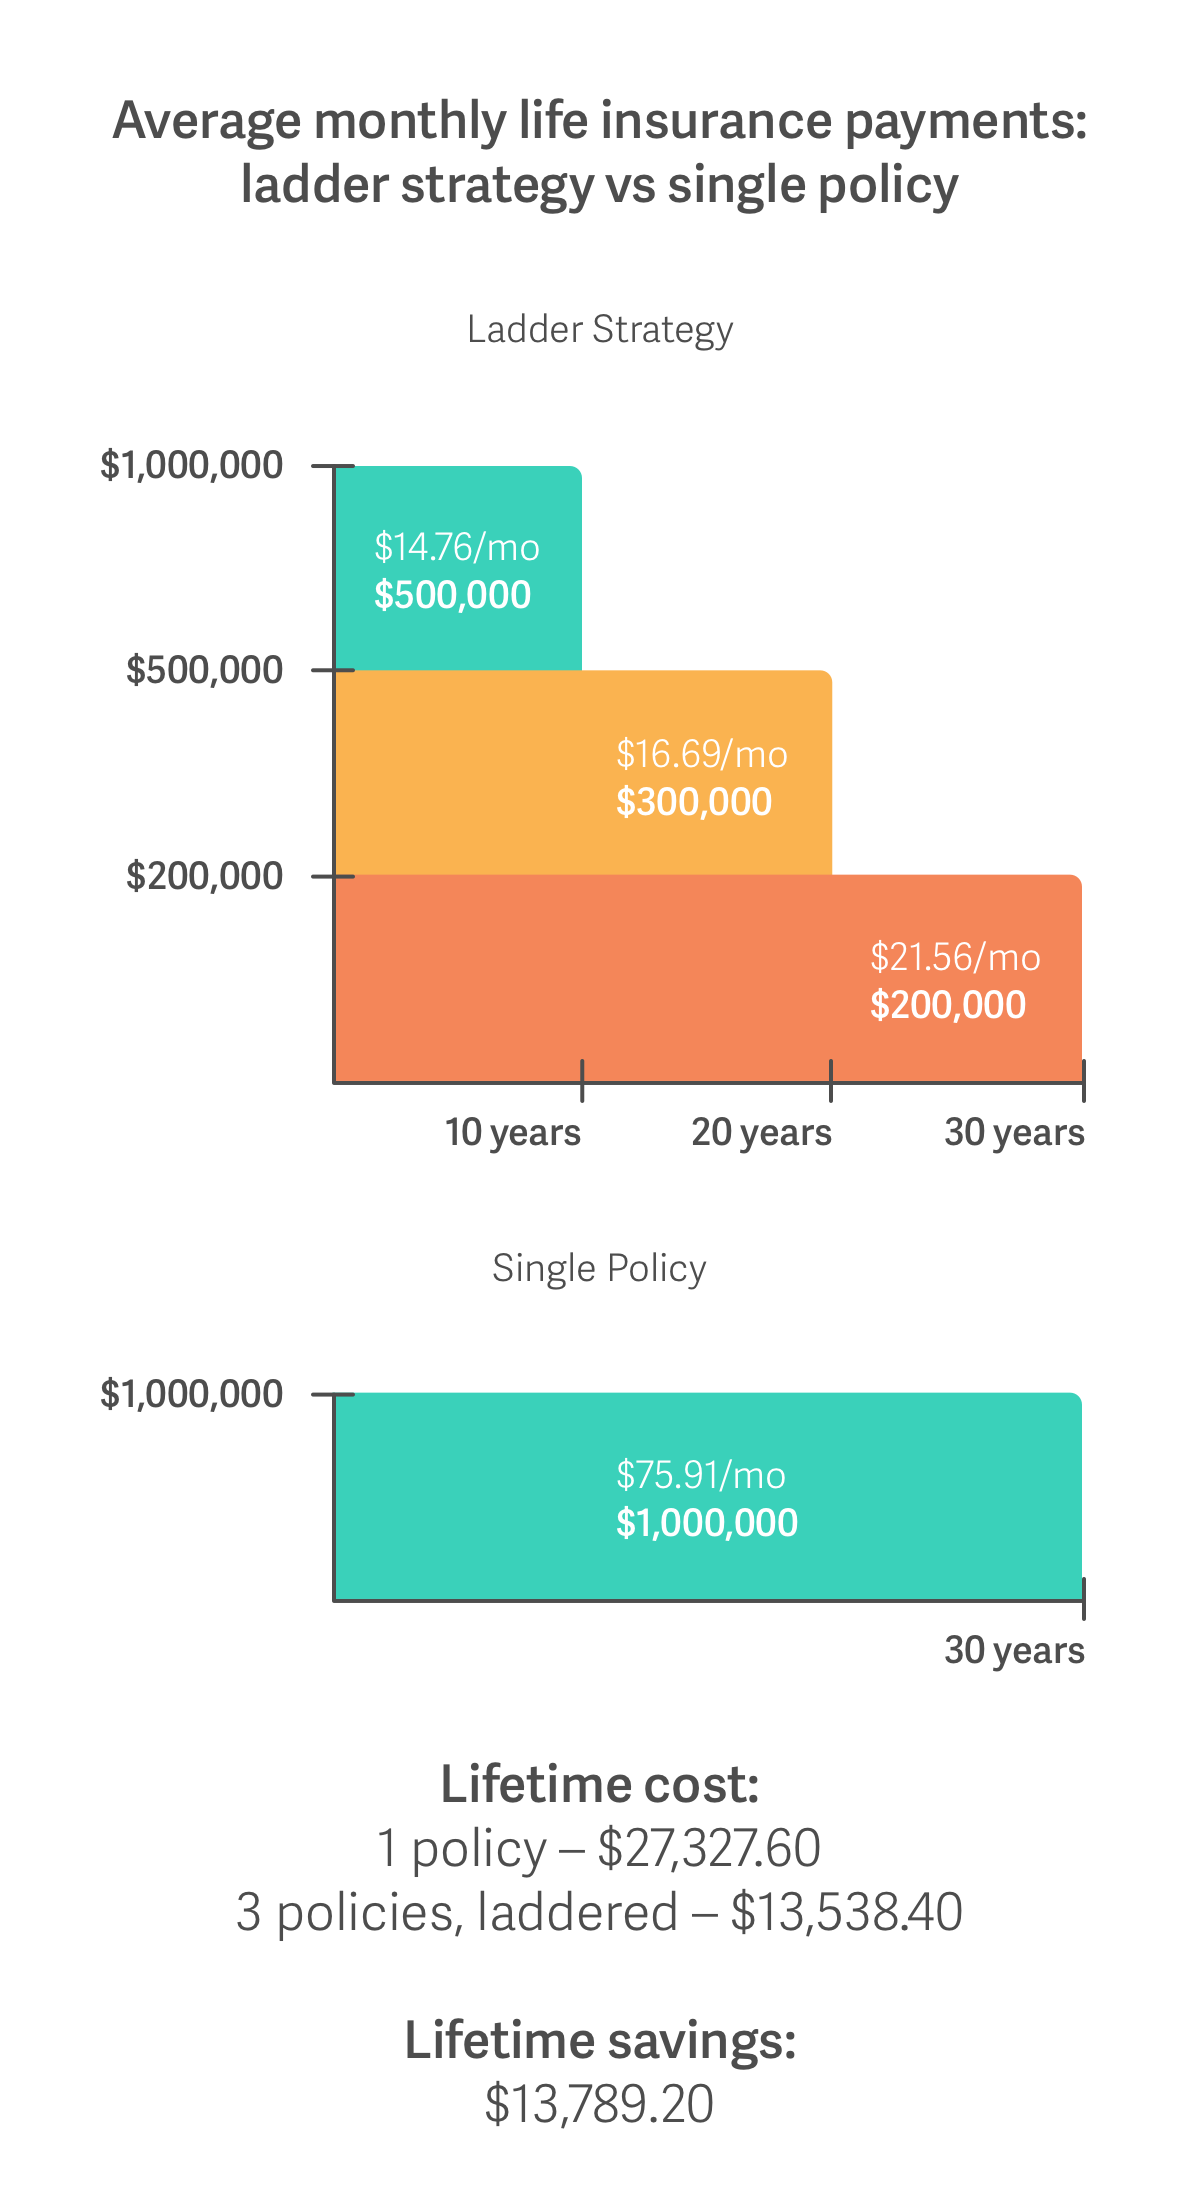 Using the ladder strategy to save money on life insurance